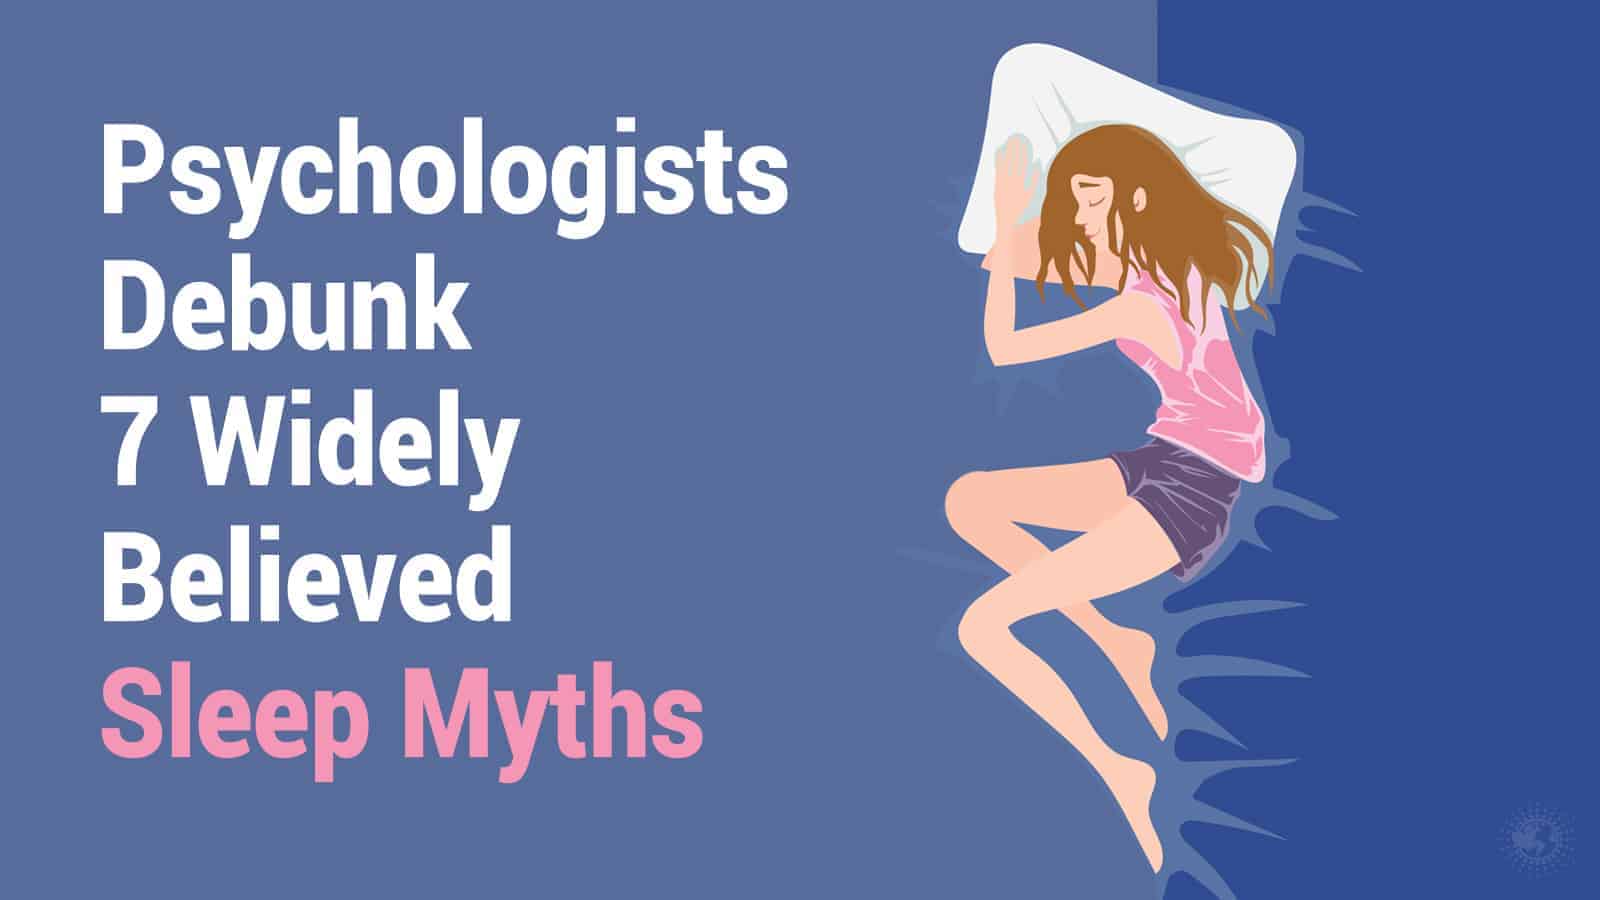 Psychologists Debunk 7 Widely Believed Sleep Myths